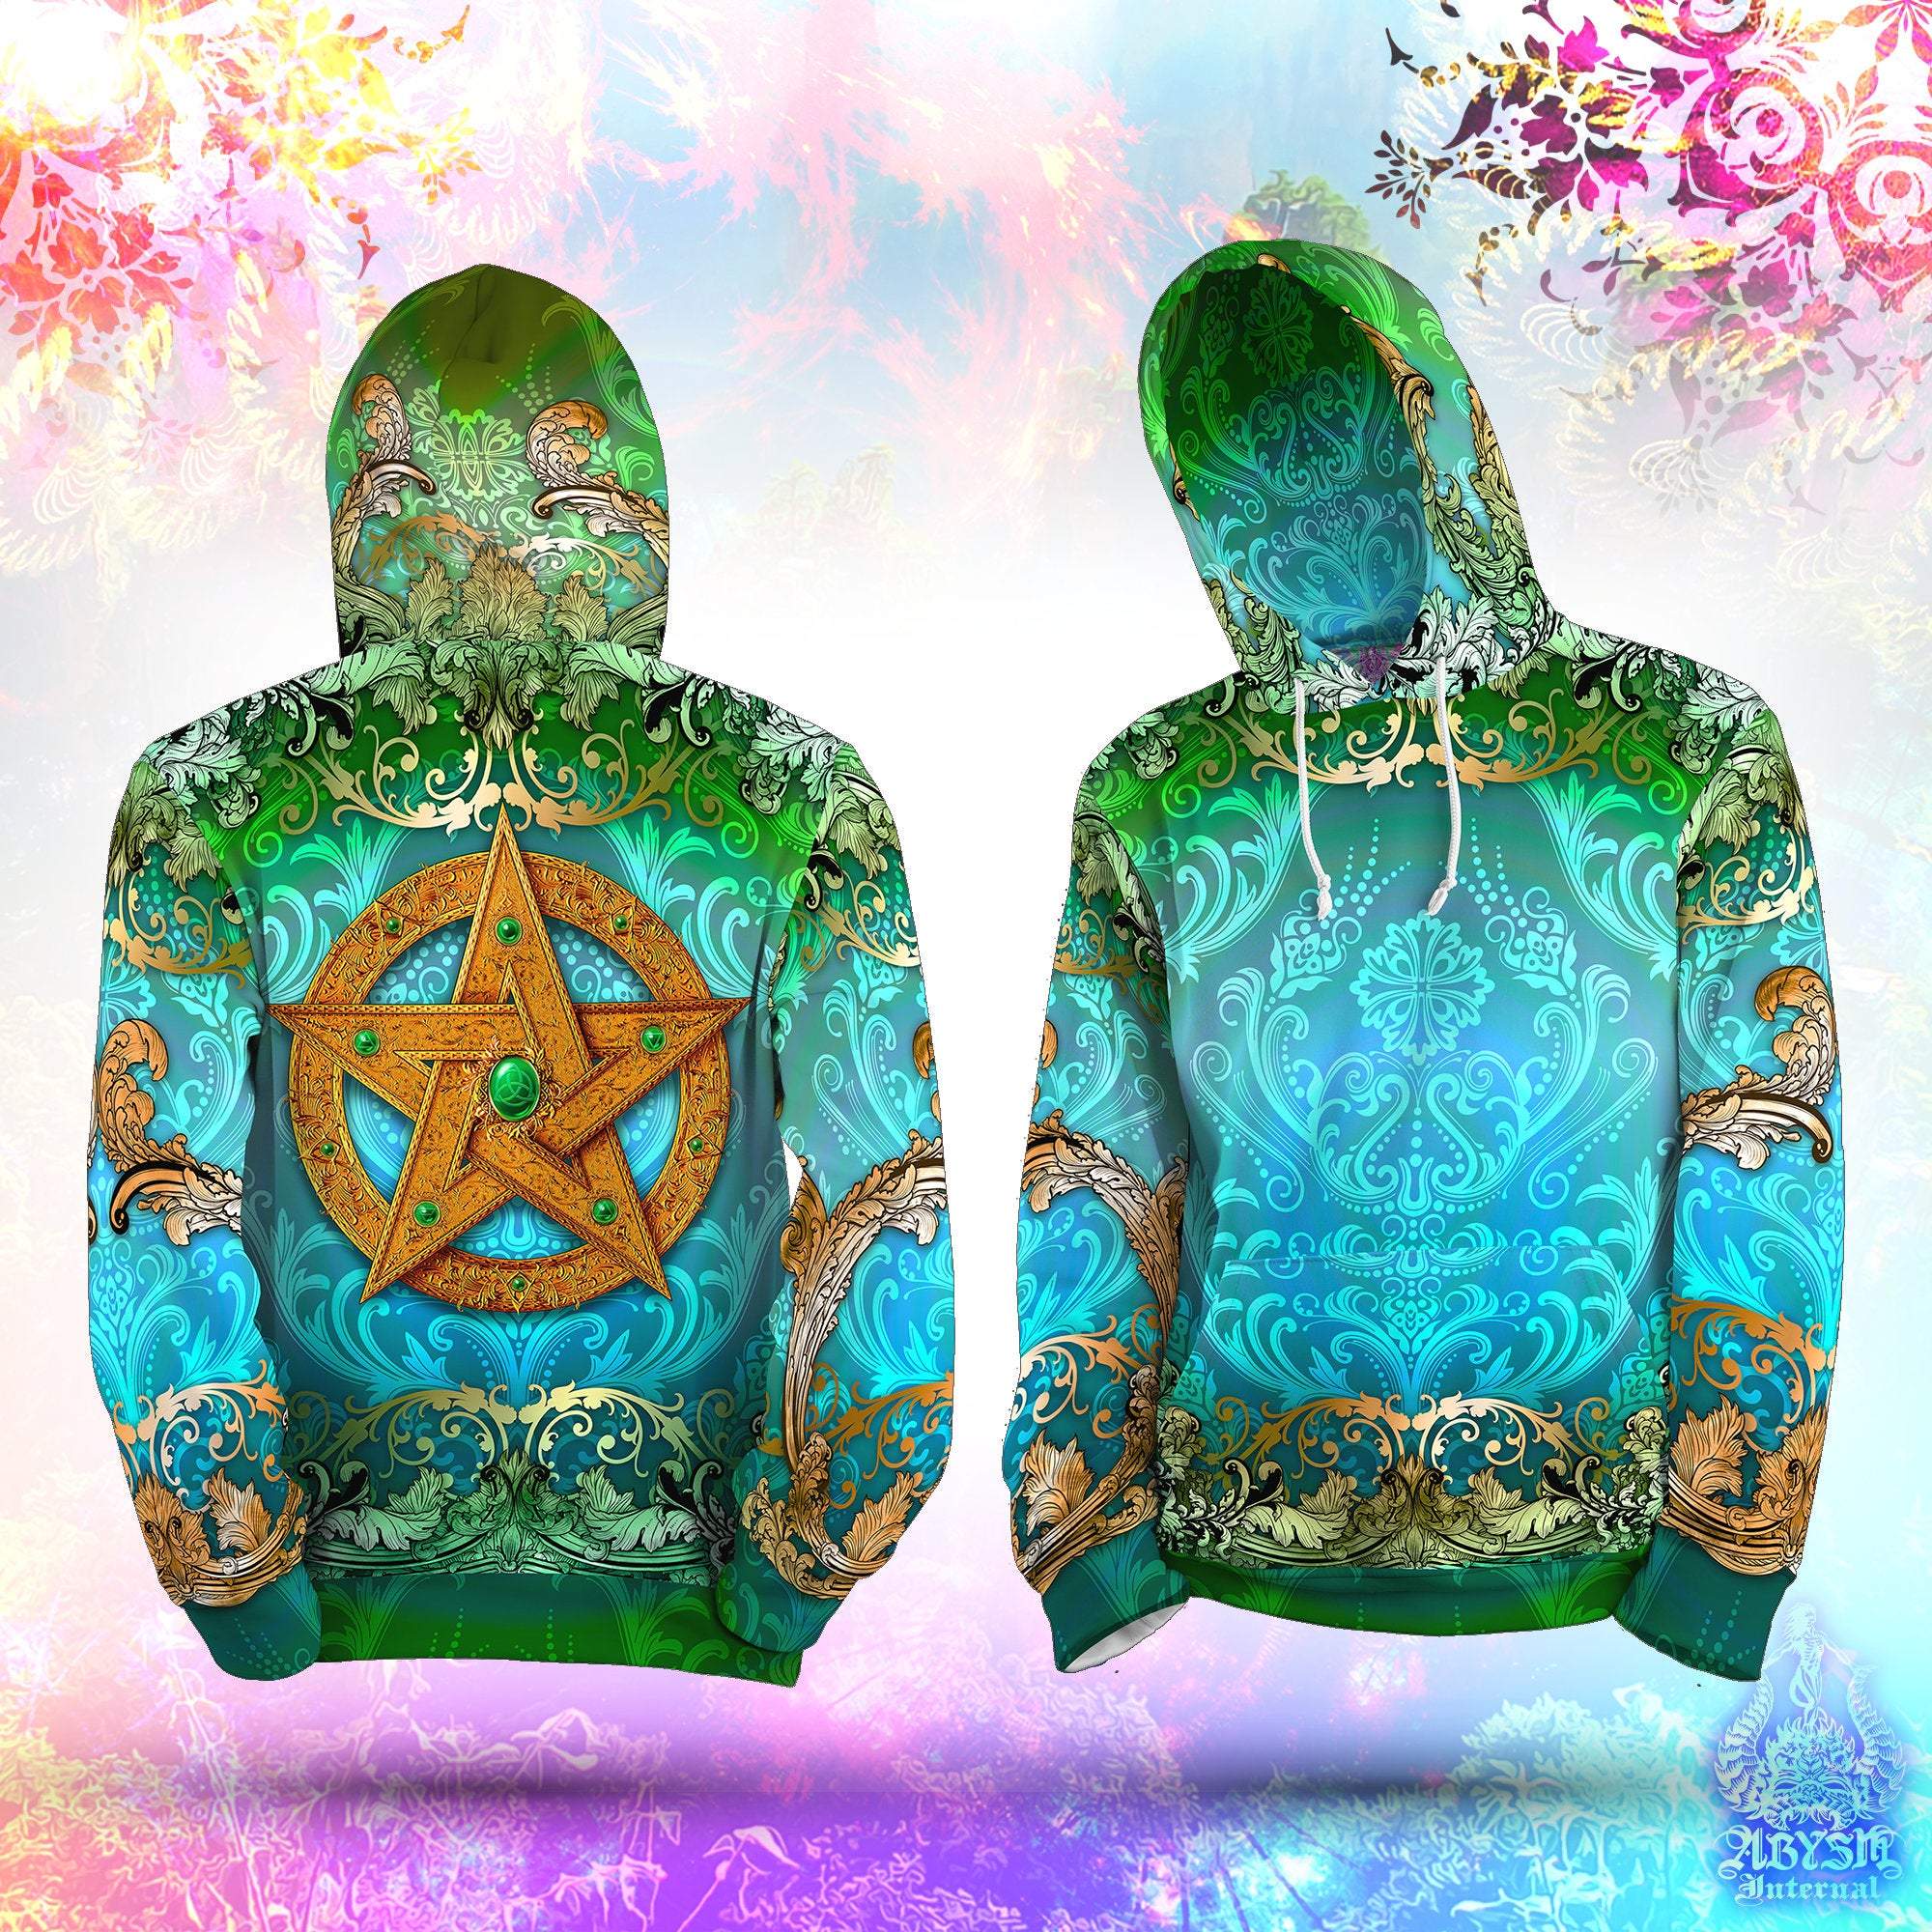 Wiccan Hoodie, Pagan Outfit, Witchy Streetwear, Witch Sweater, Pagan Alternative Clothing, Unisex - Pentacle, Green Blue - Abysm Internal